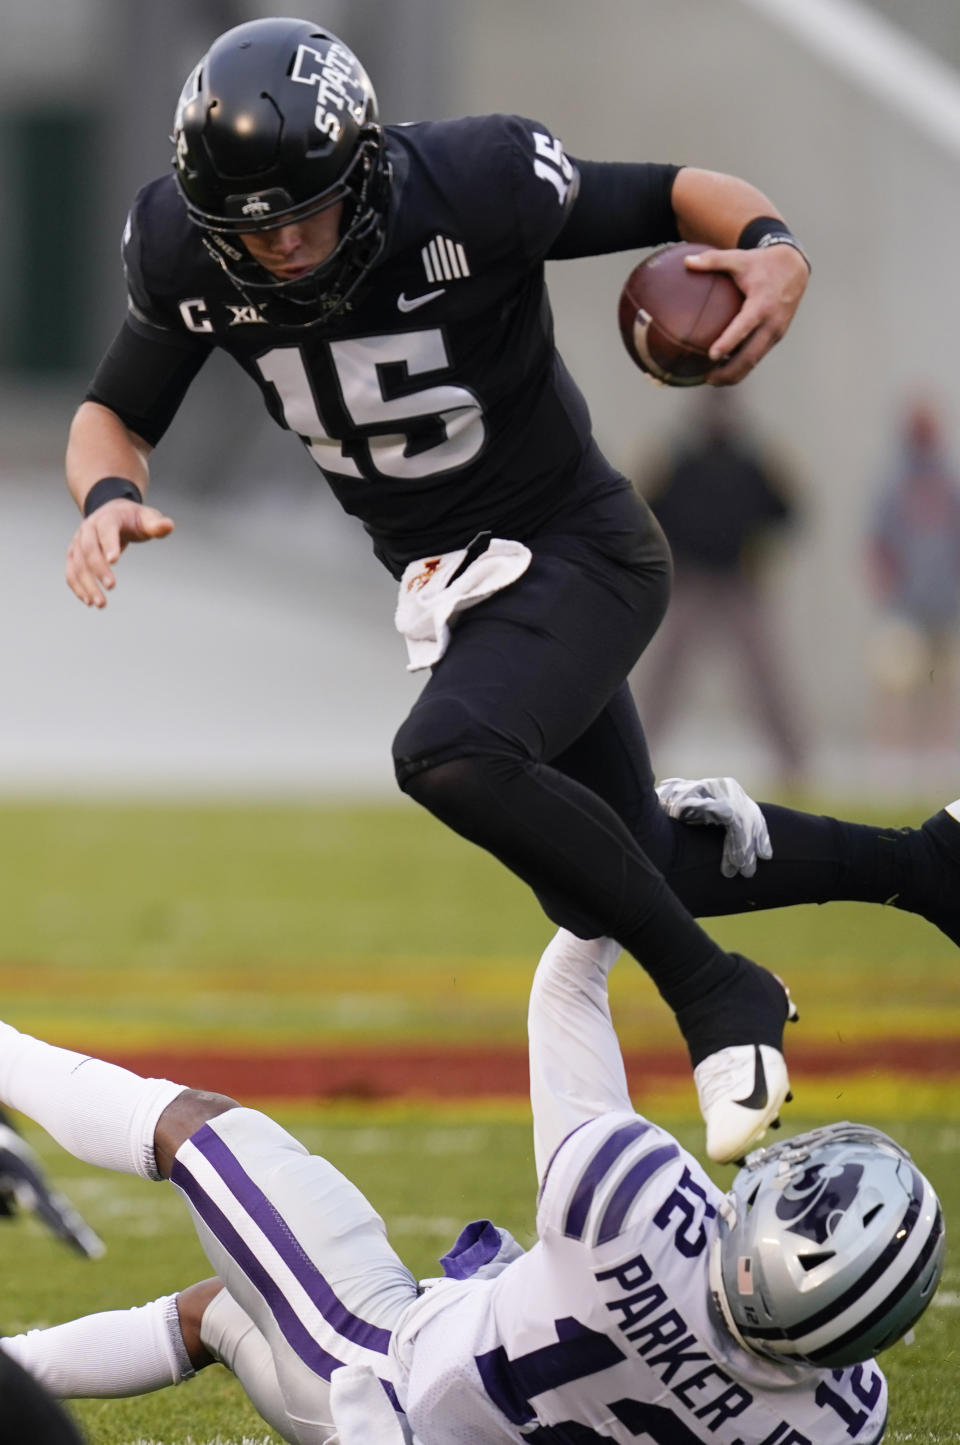 Iowa State quarterback Brock Purdy (15) leaps over Kansas State defensive back AJ Parker (12) during the first half of an NCAA college football game, Saturday, Nov. 21, 2020, in Ames, Iowa. (AP Photo/Charlie Neibergall)